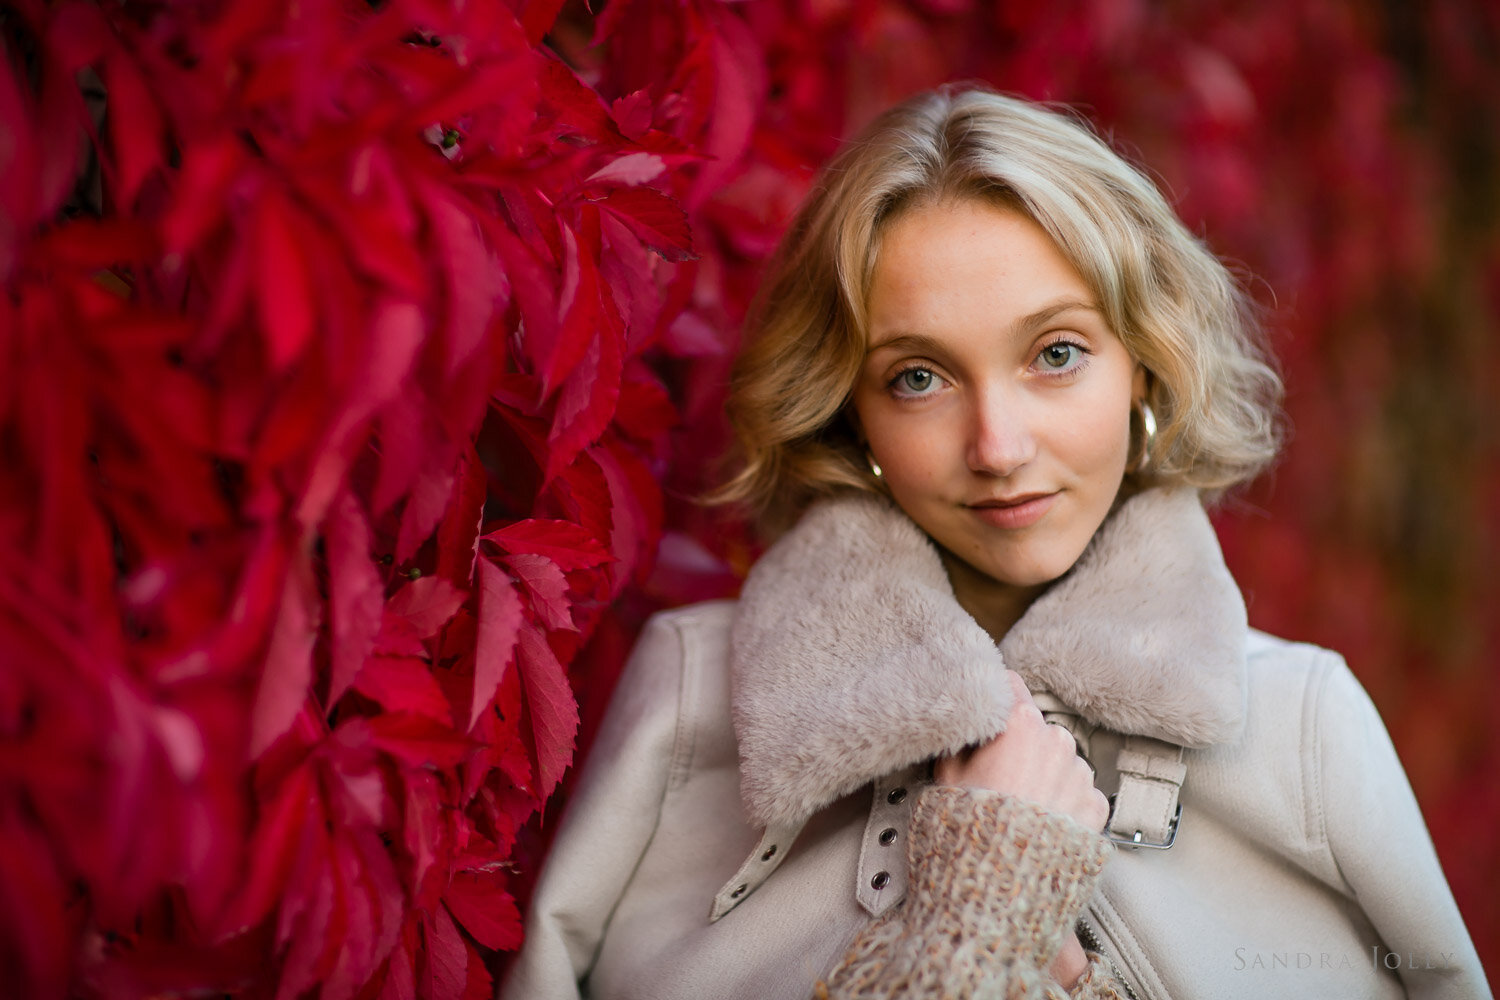 red-autumn-leaves-and-teenage-girl-with-jacket-by-stockholm-portrait-photographer-sandra-jolly-photography.jpg